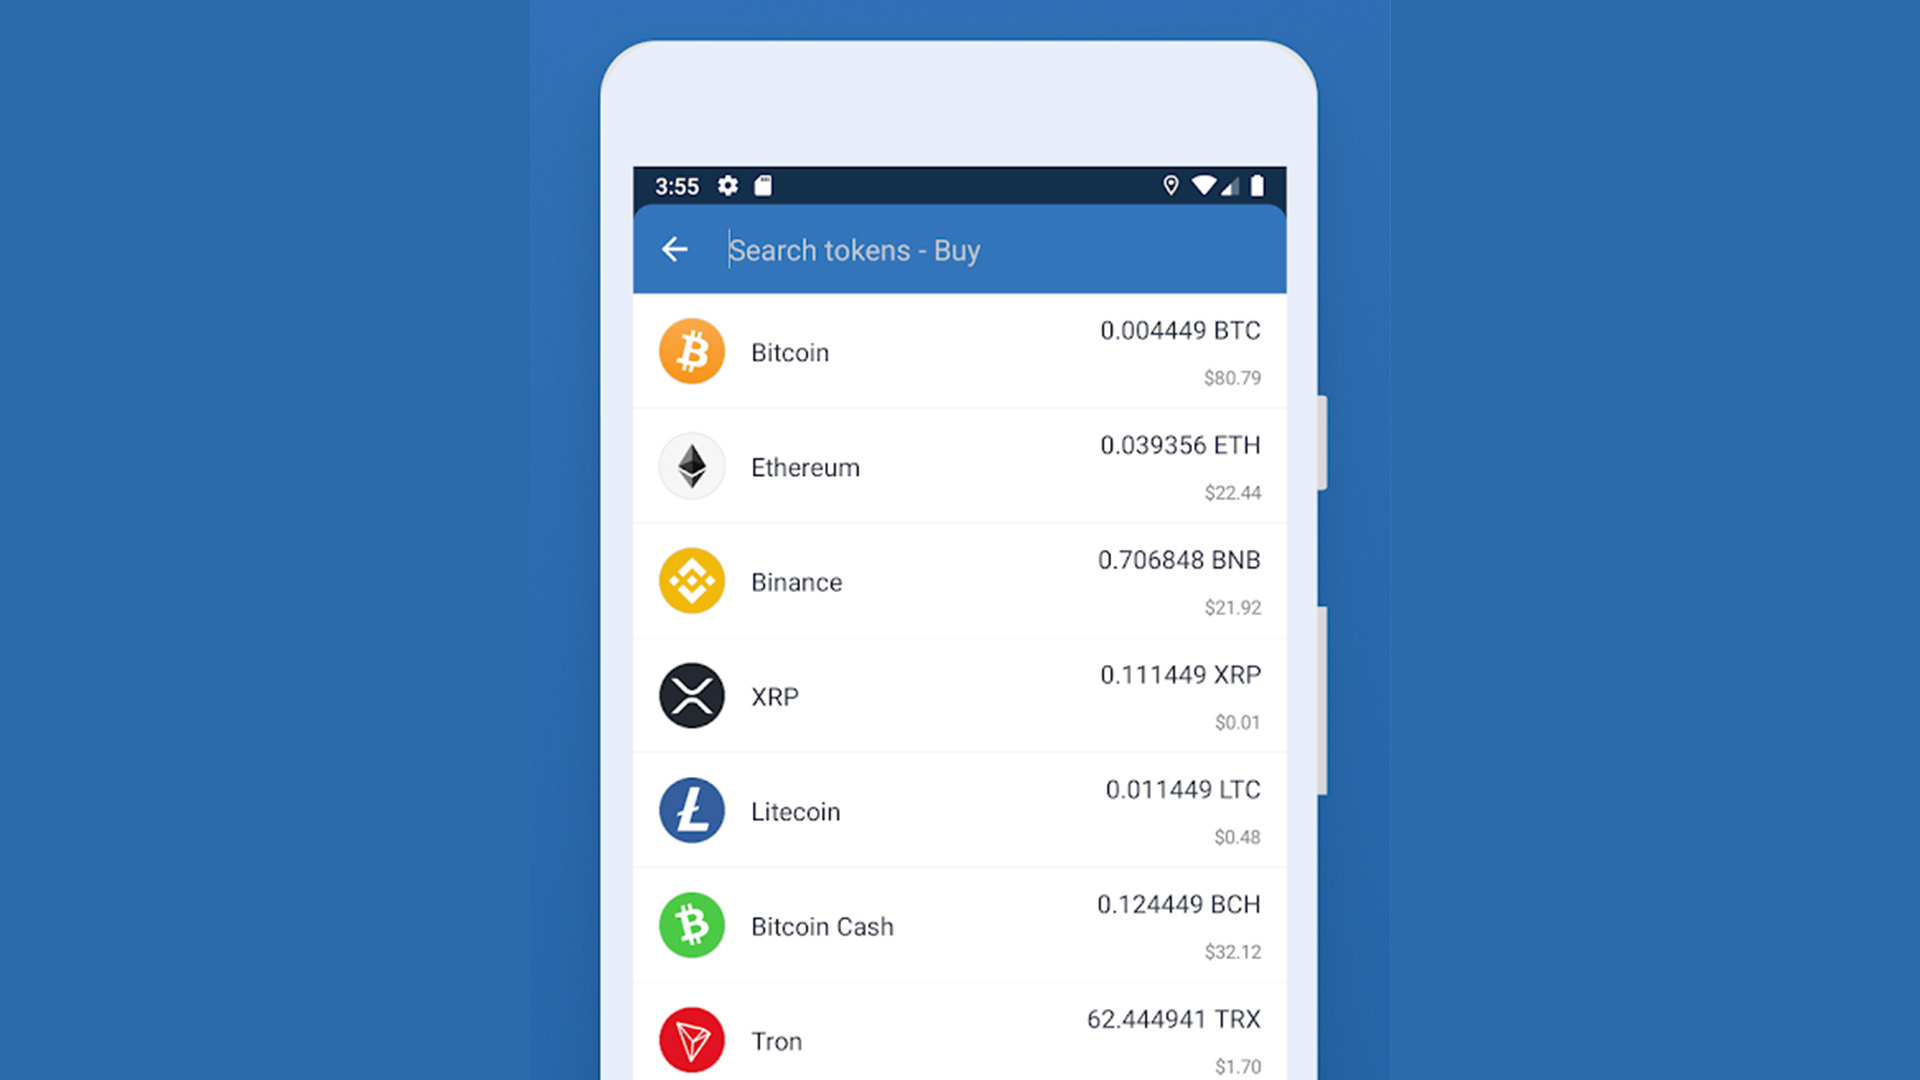 most trusted bitcoin wallets